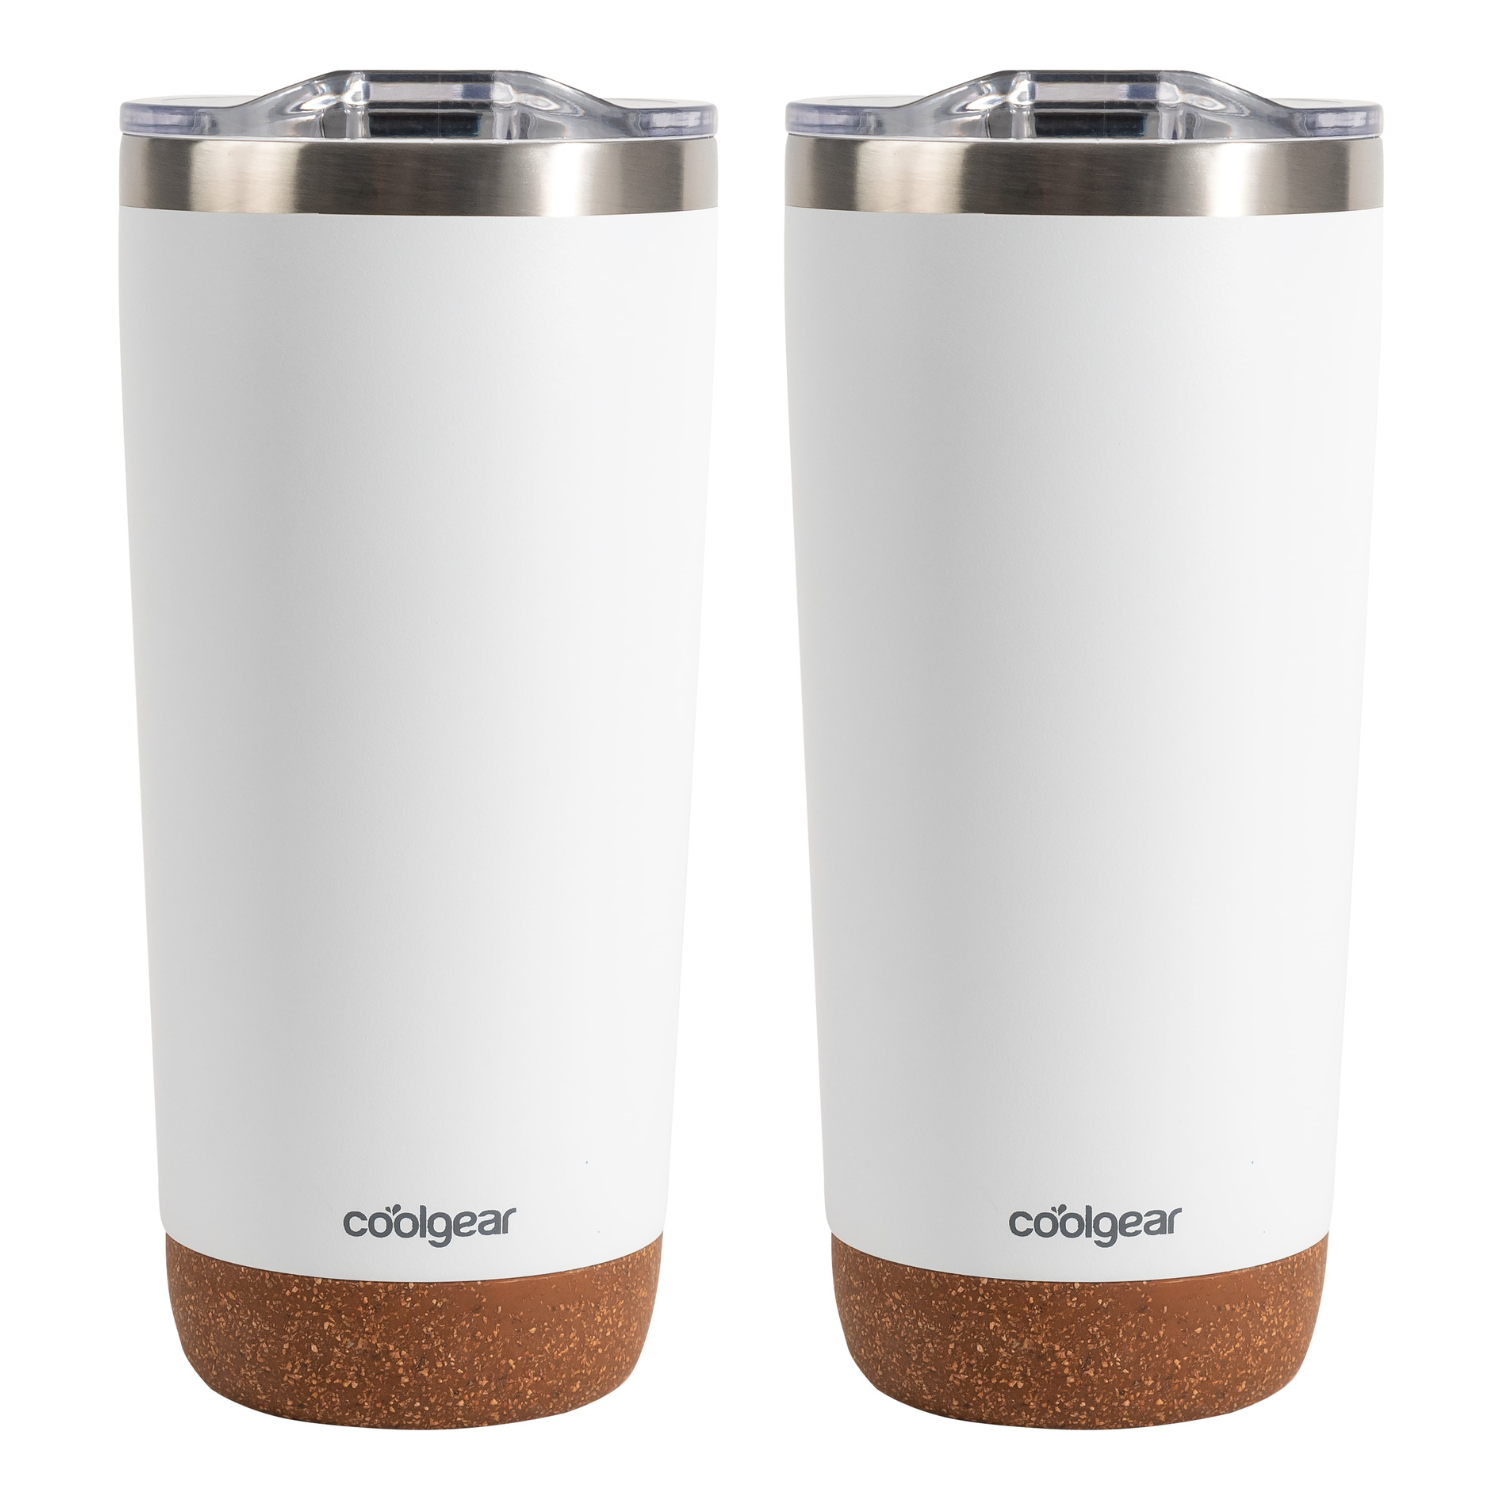 Luxe Stainless Steel Travel Tumbler with Spill-Proof Lid and Straw